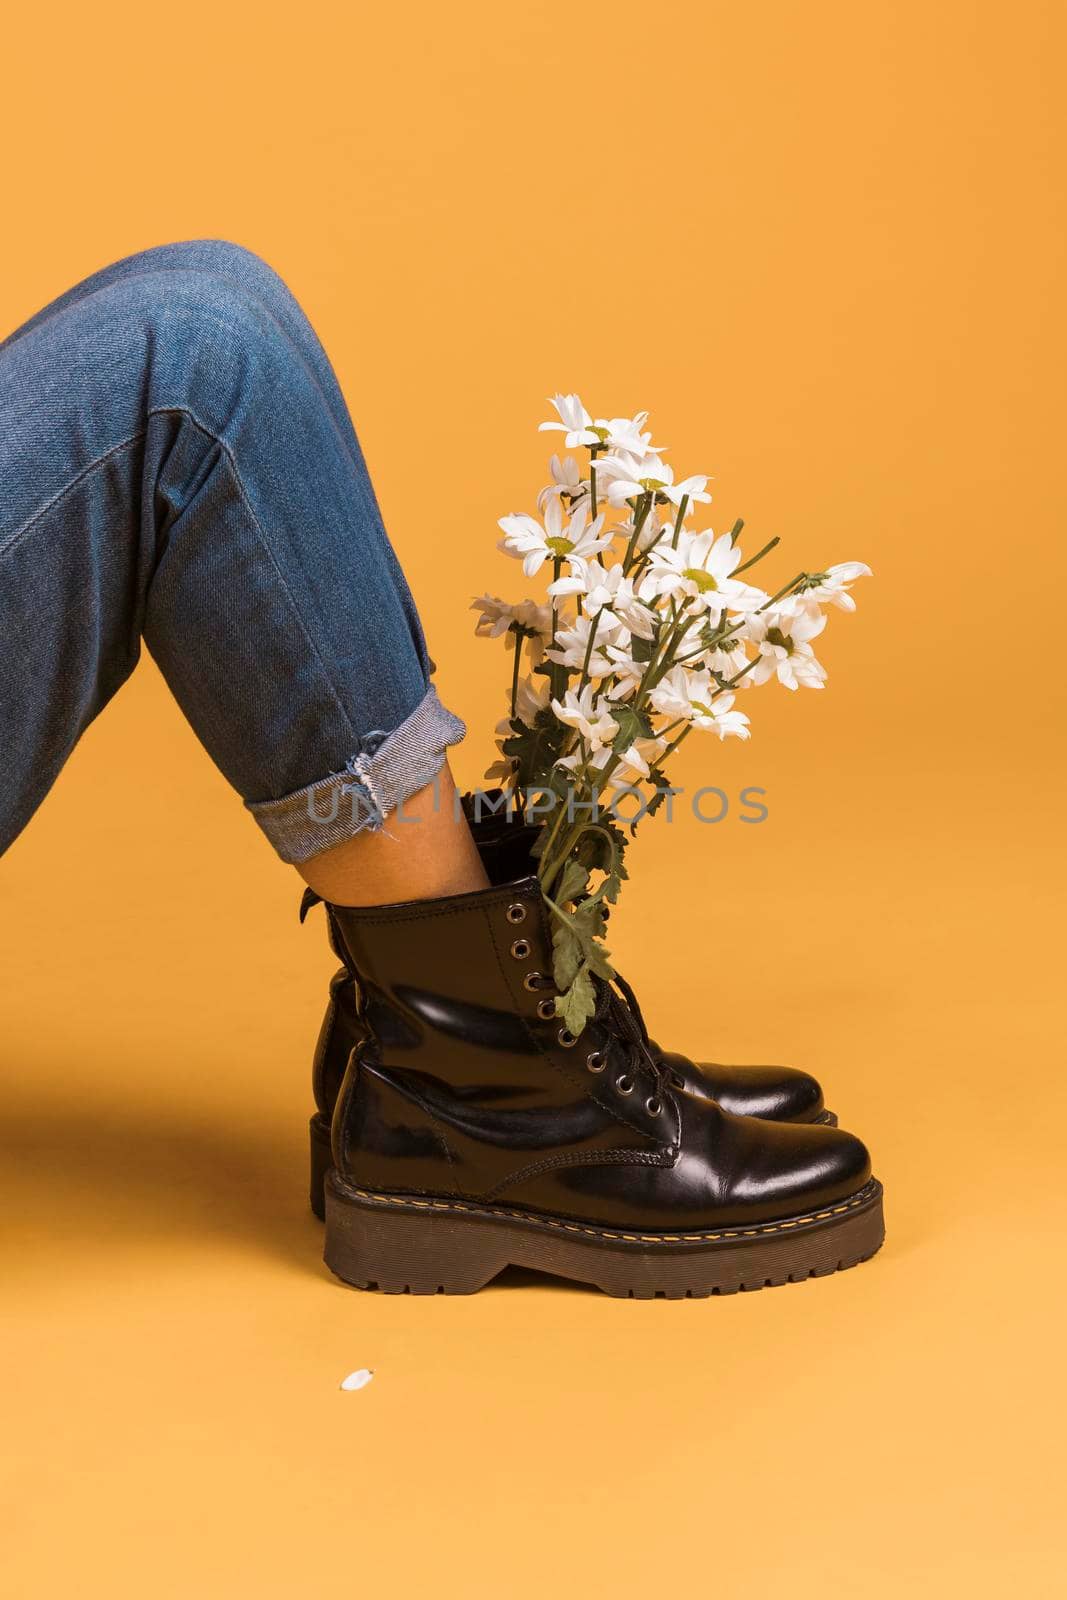 sitting female legs boots with flowers inside. High quality photo by Zahard